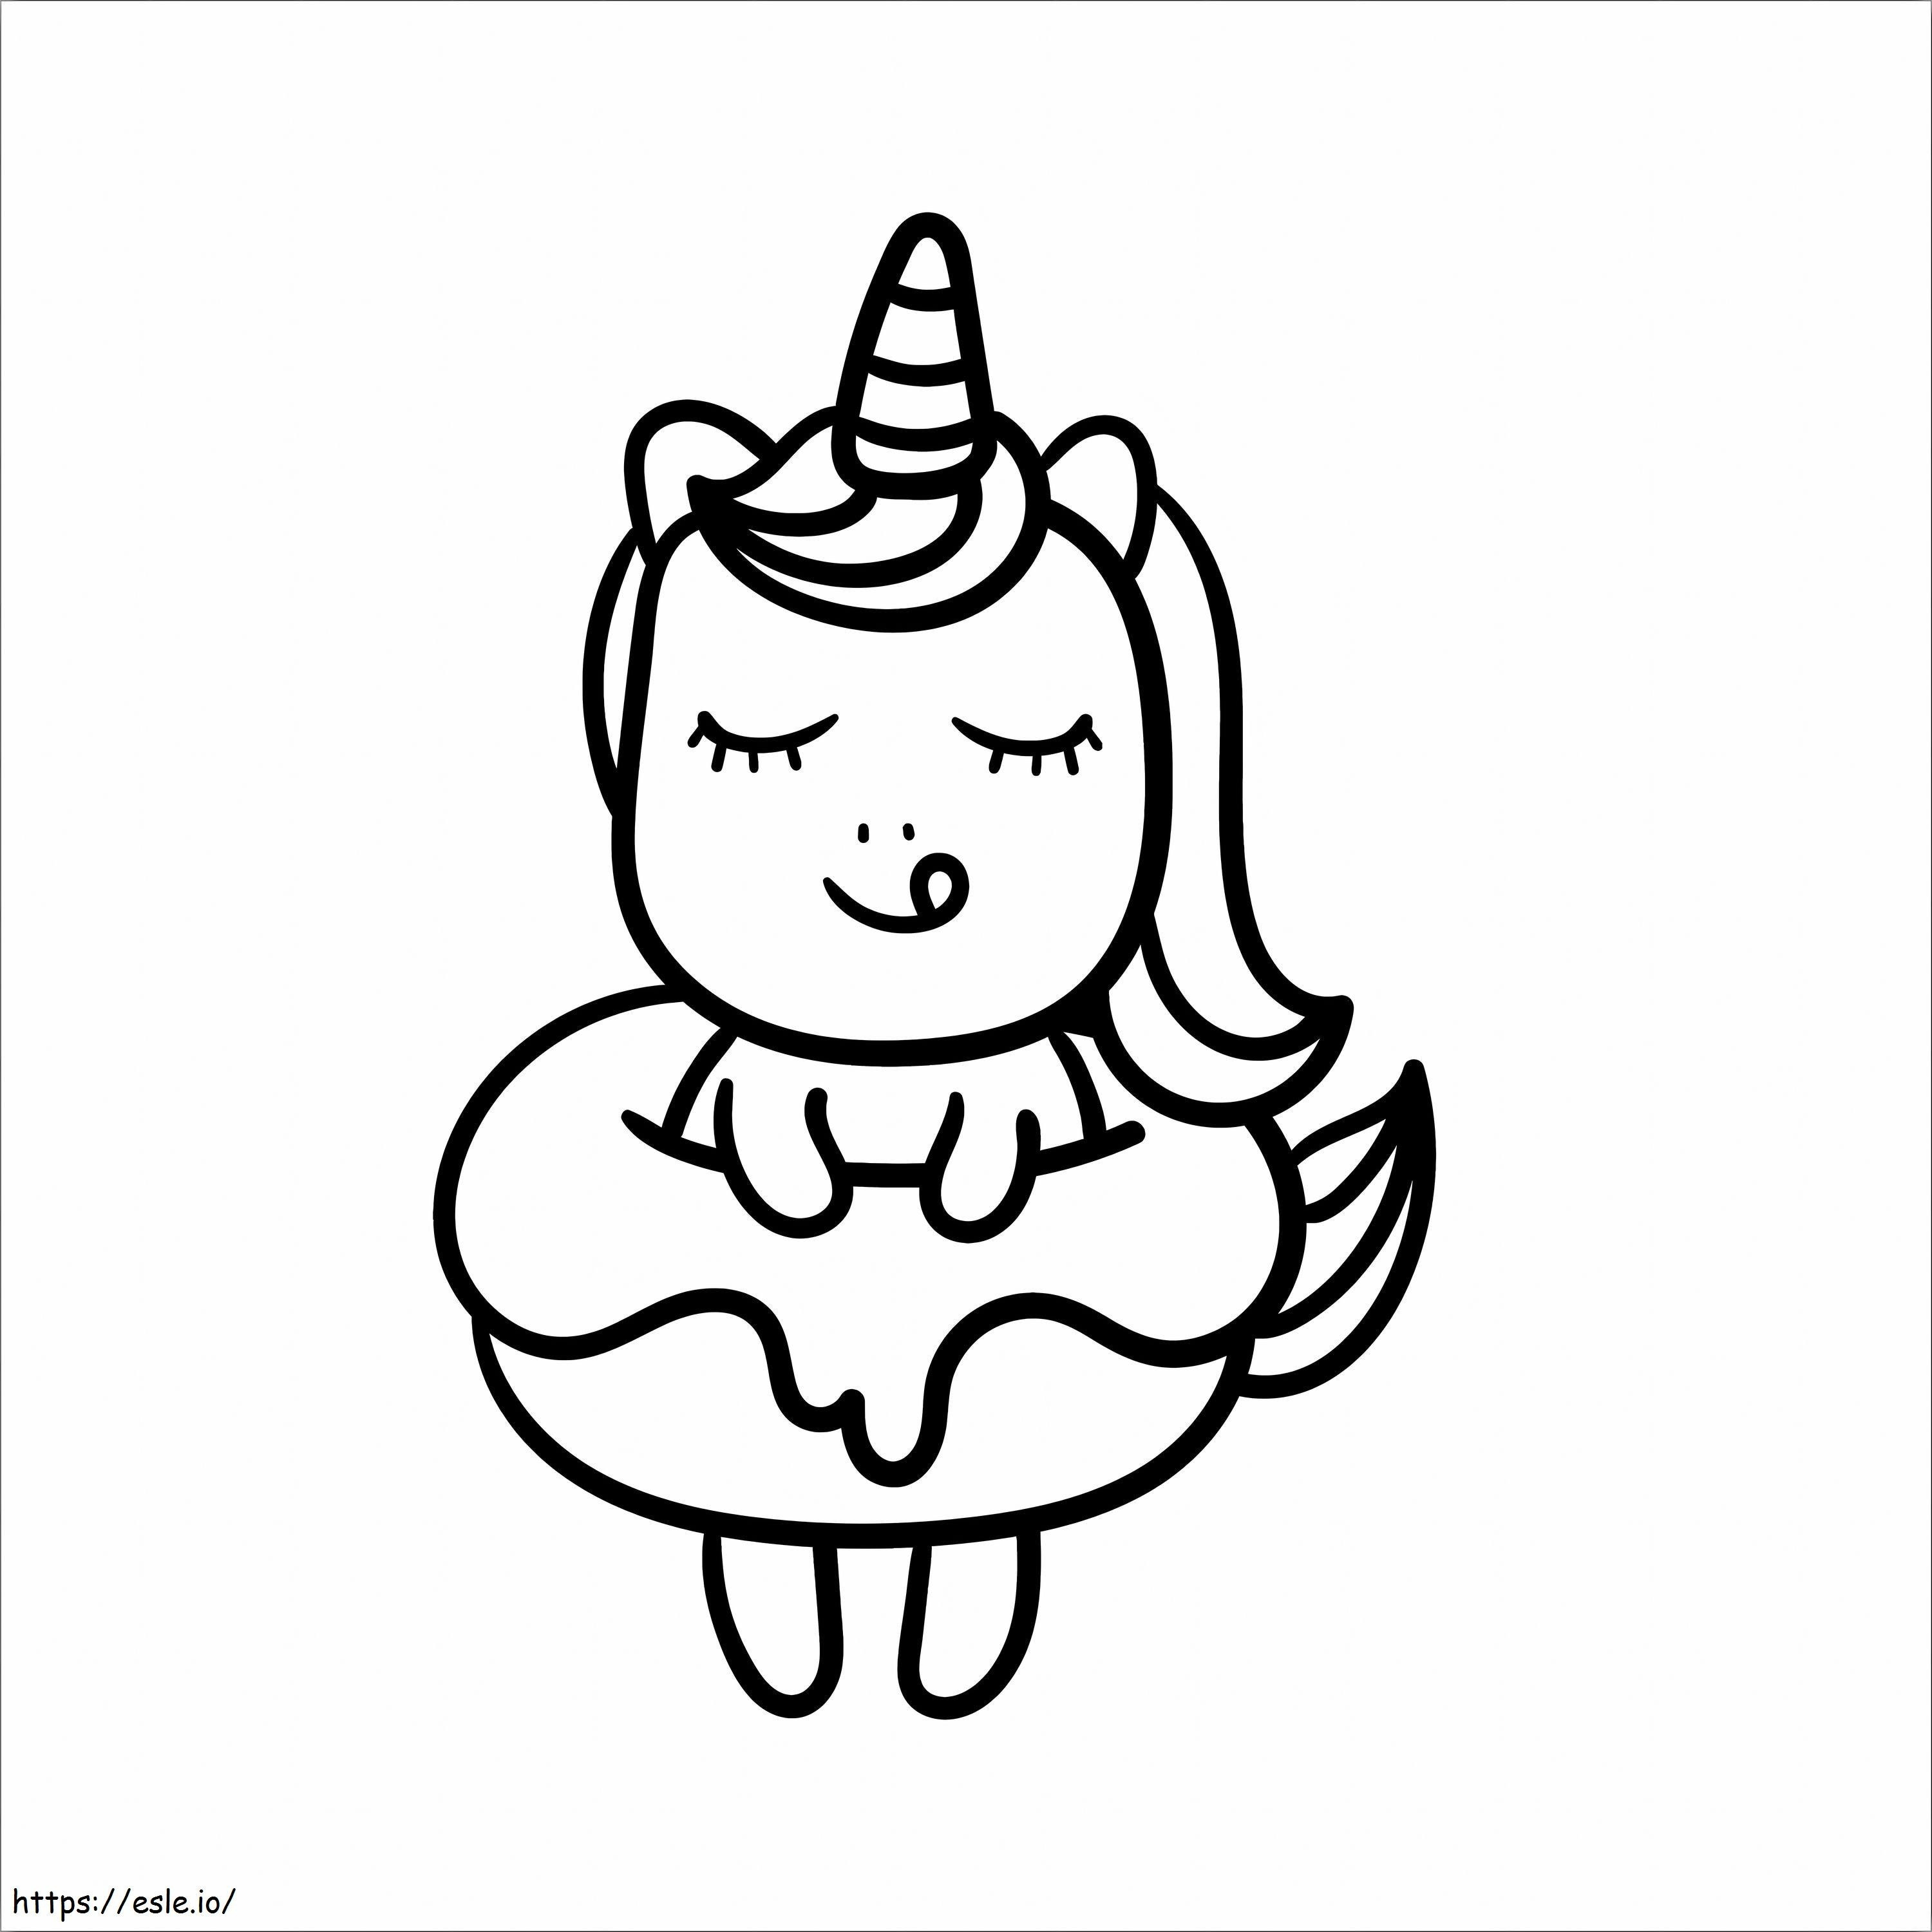 Unicorn With Donut coloring page